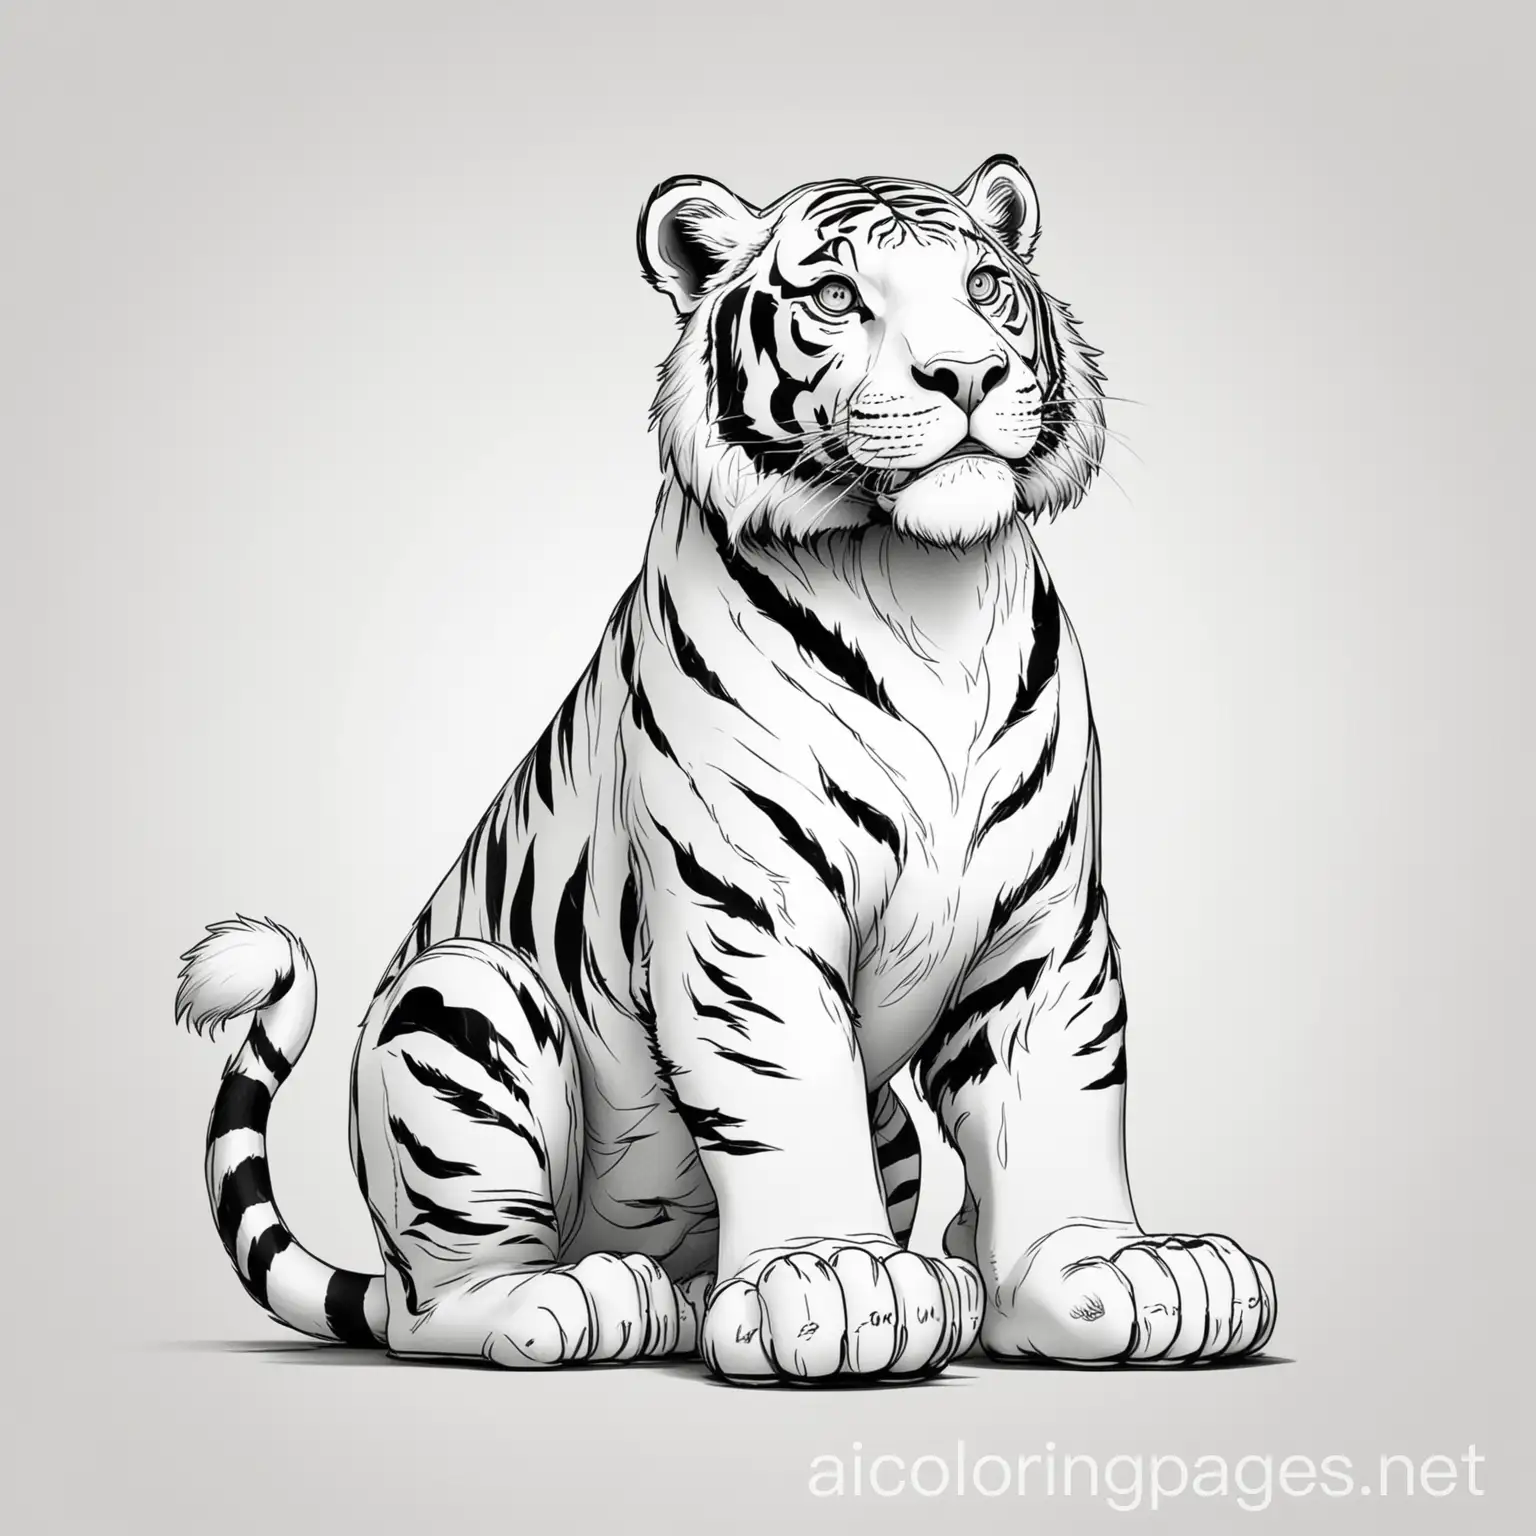 big cartoon tiger looking away two feet up coloring page black and white cartoon style, Coloring Page, black and white, line art, white background, Simplicity, Ample White Space